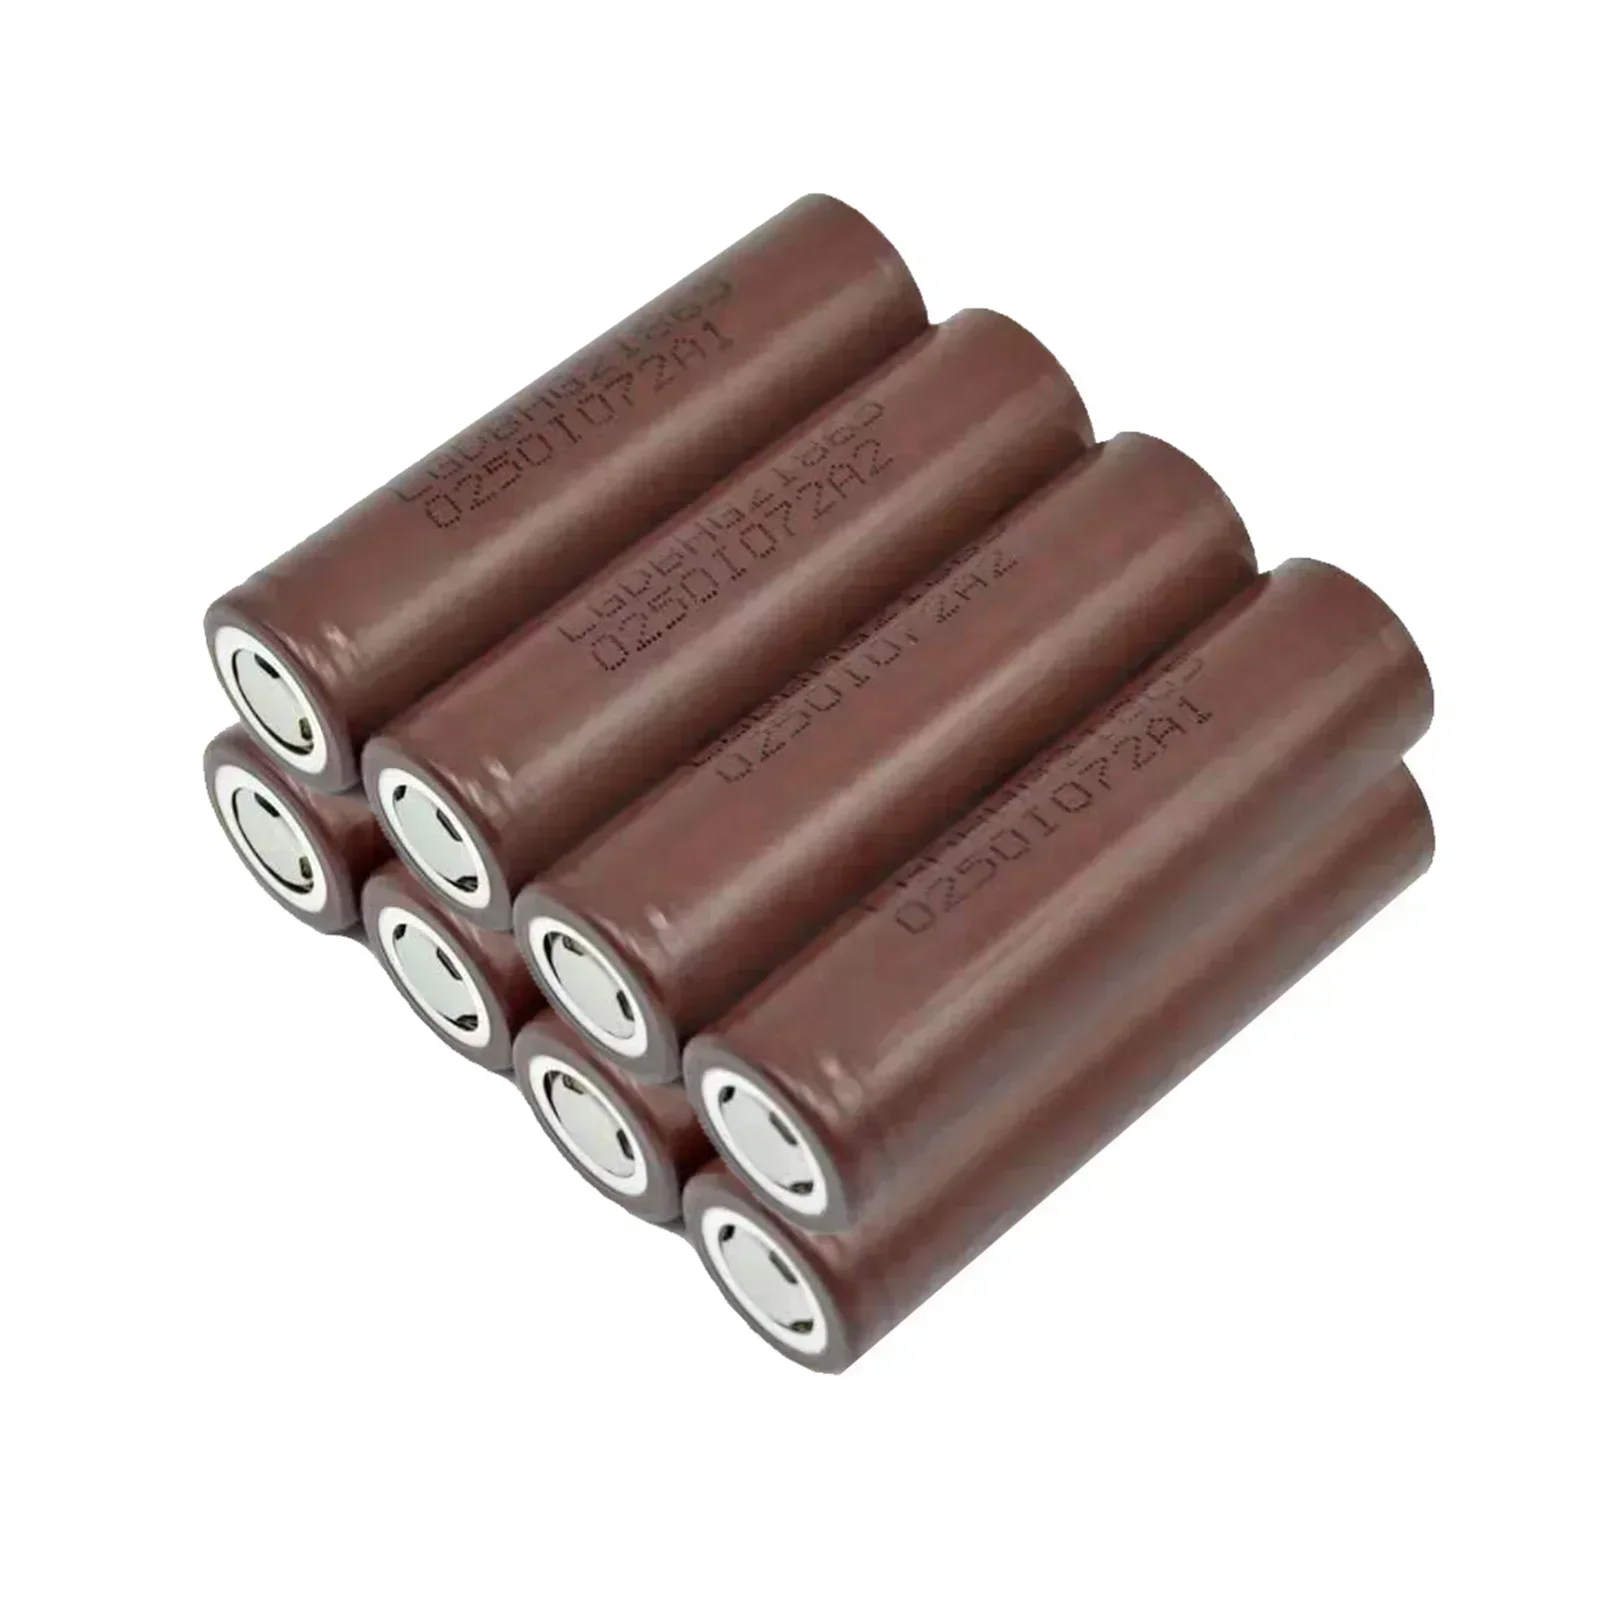 

HG2 18650 3000mAh Battery 3.7 V 30a High Discharge 18650 Rechargeable Batteries for HG2 18650 Flashlight Tools Battery